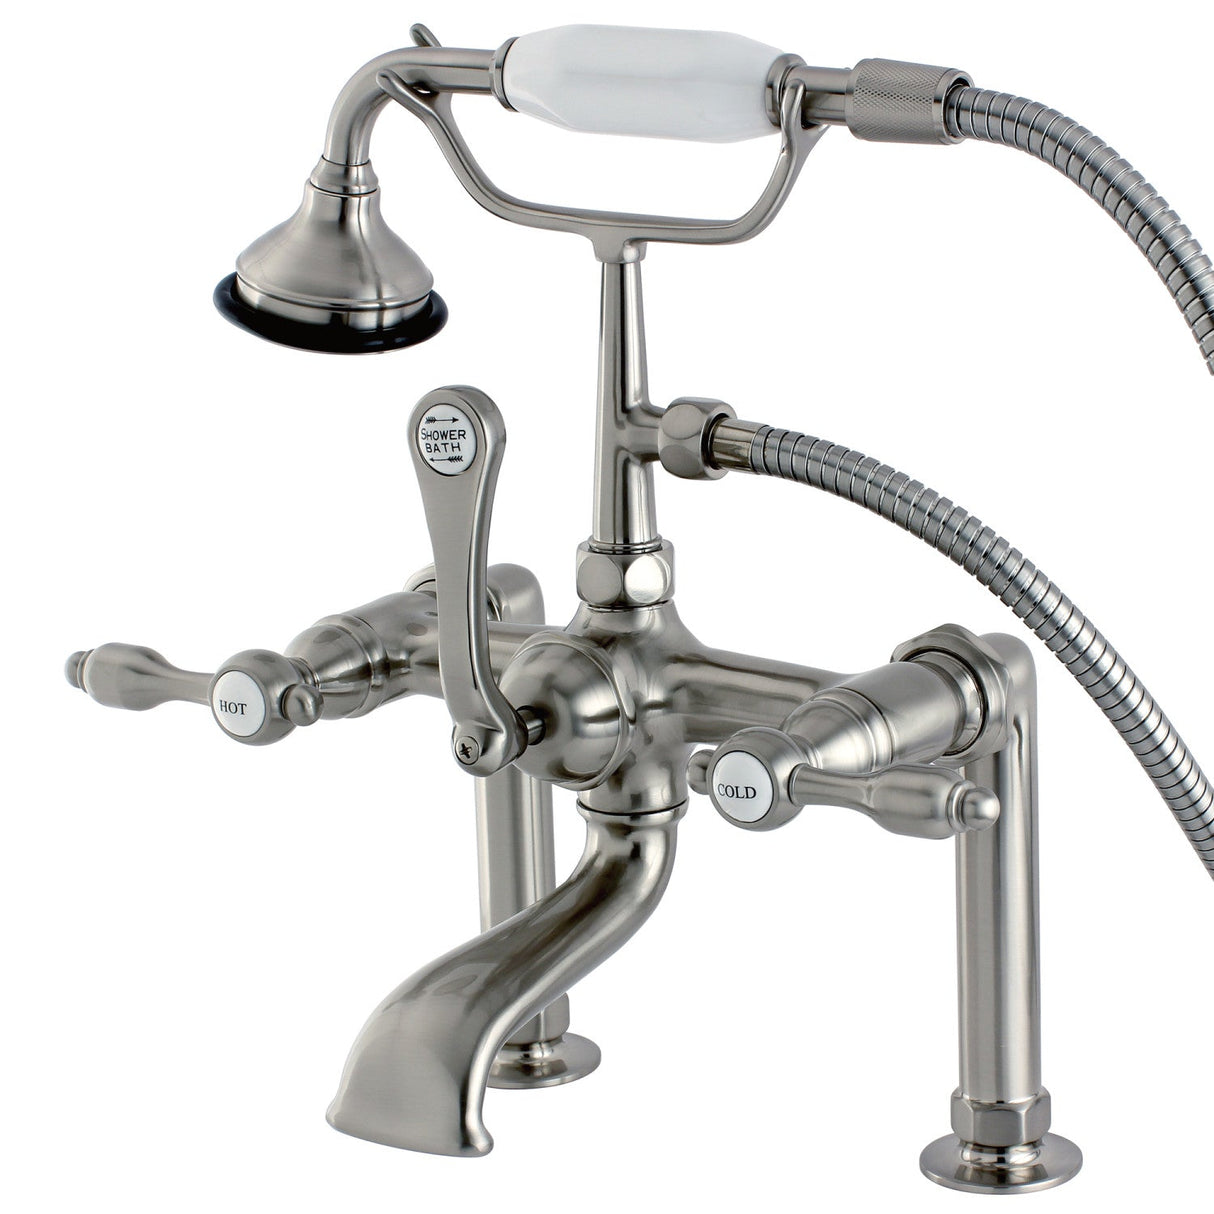 Tudor AE103T8TAL Three-Handle 2-Hole Deck Mount Clawfoot Tub Faucet with Hand Shower, Brushed Nickel